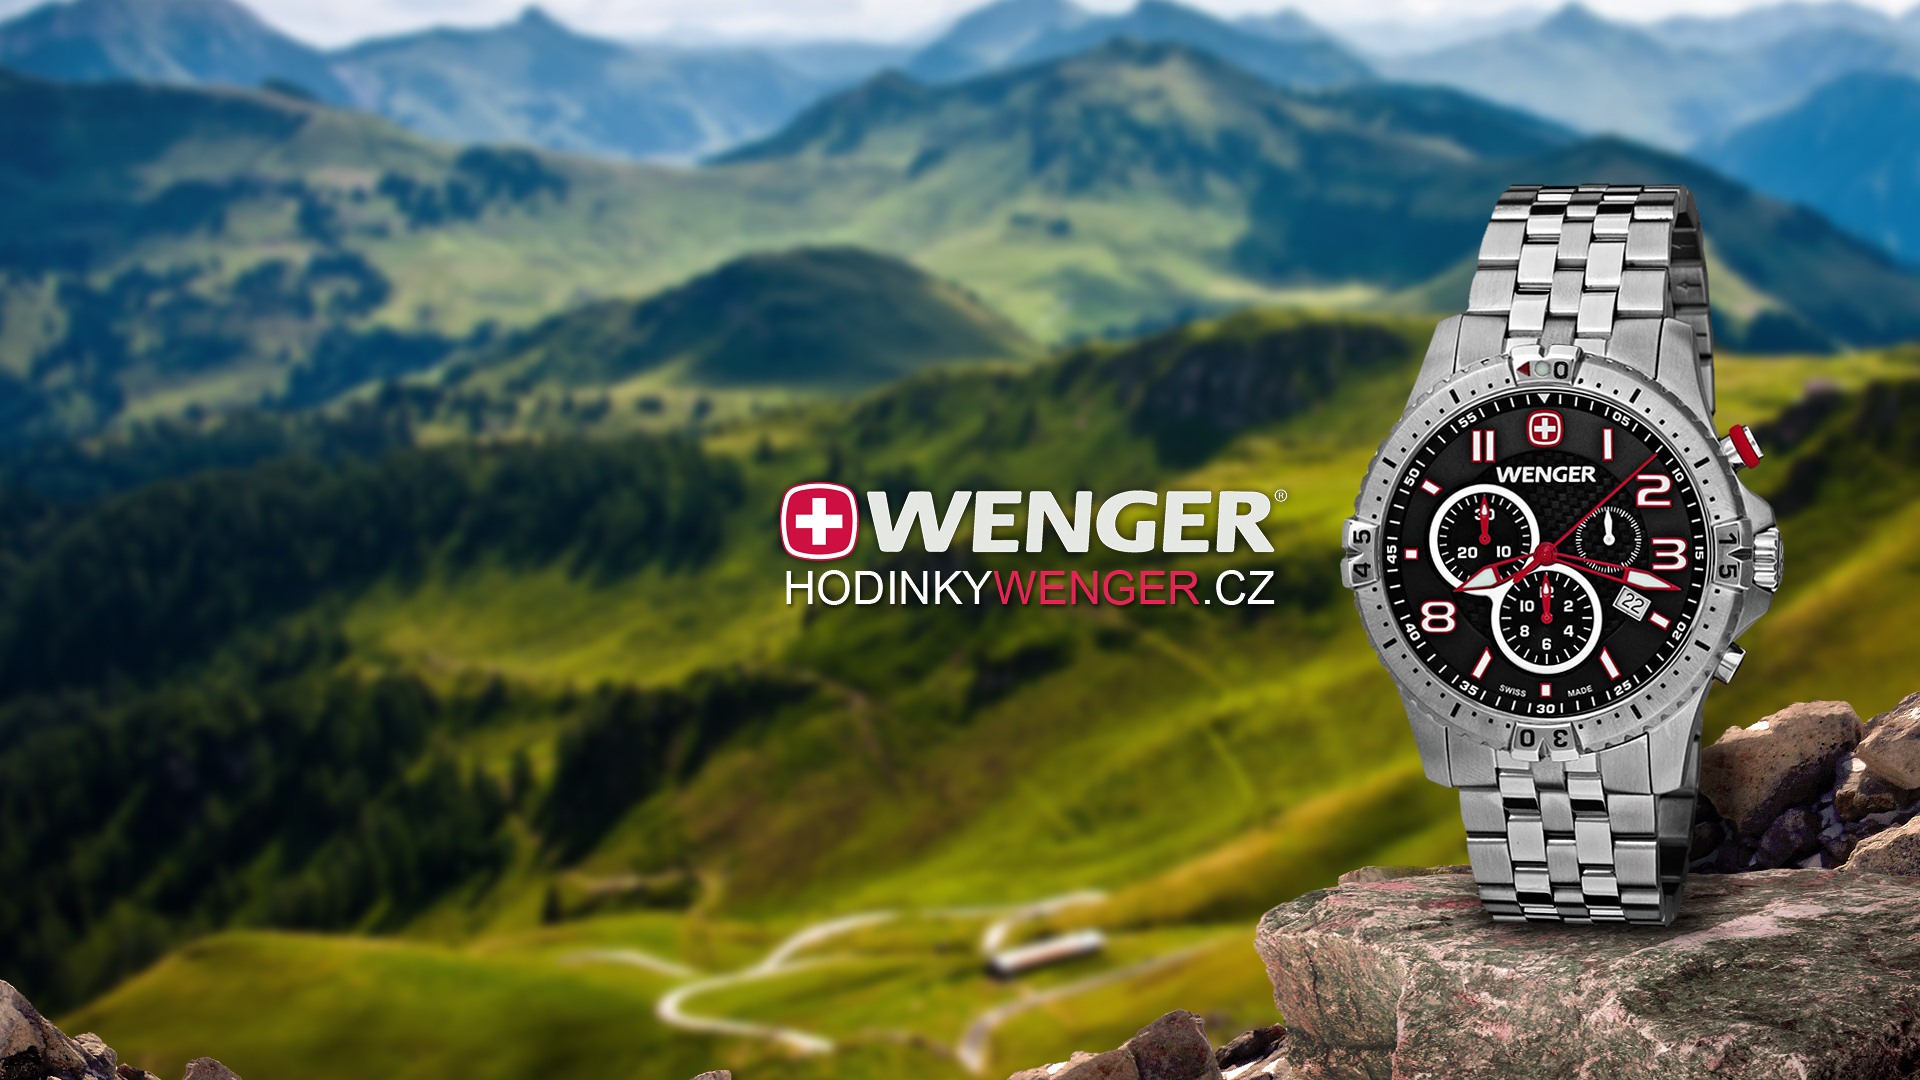 World famous watches wallpapers (2) #19 - 1920x1080